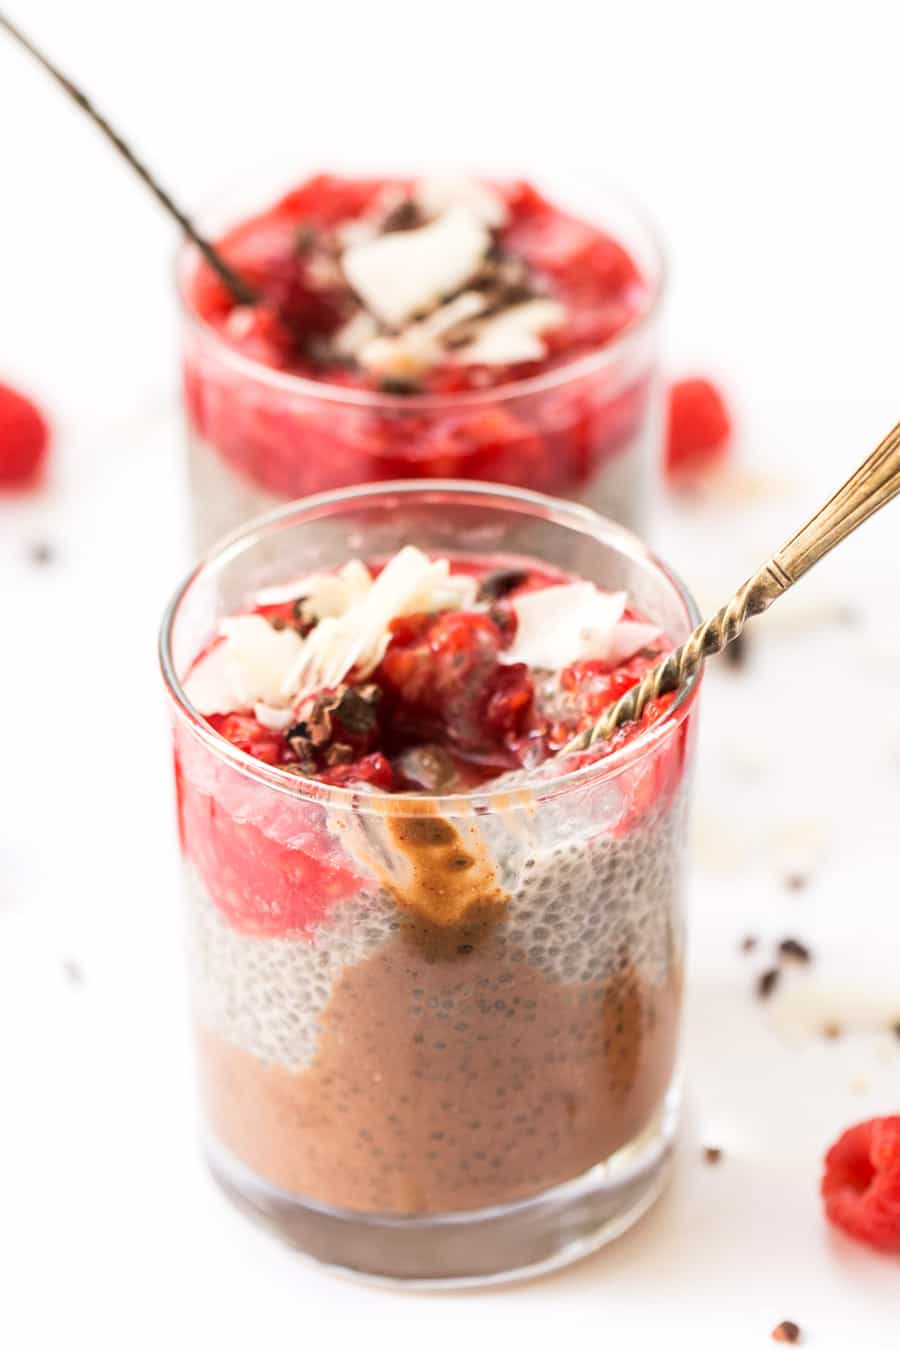 This HEALTHY & DELICIOUS Layered Chia Parfaits have chocolate, chia pudding and a raspberry topping!